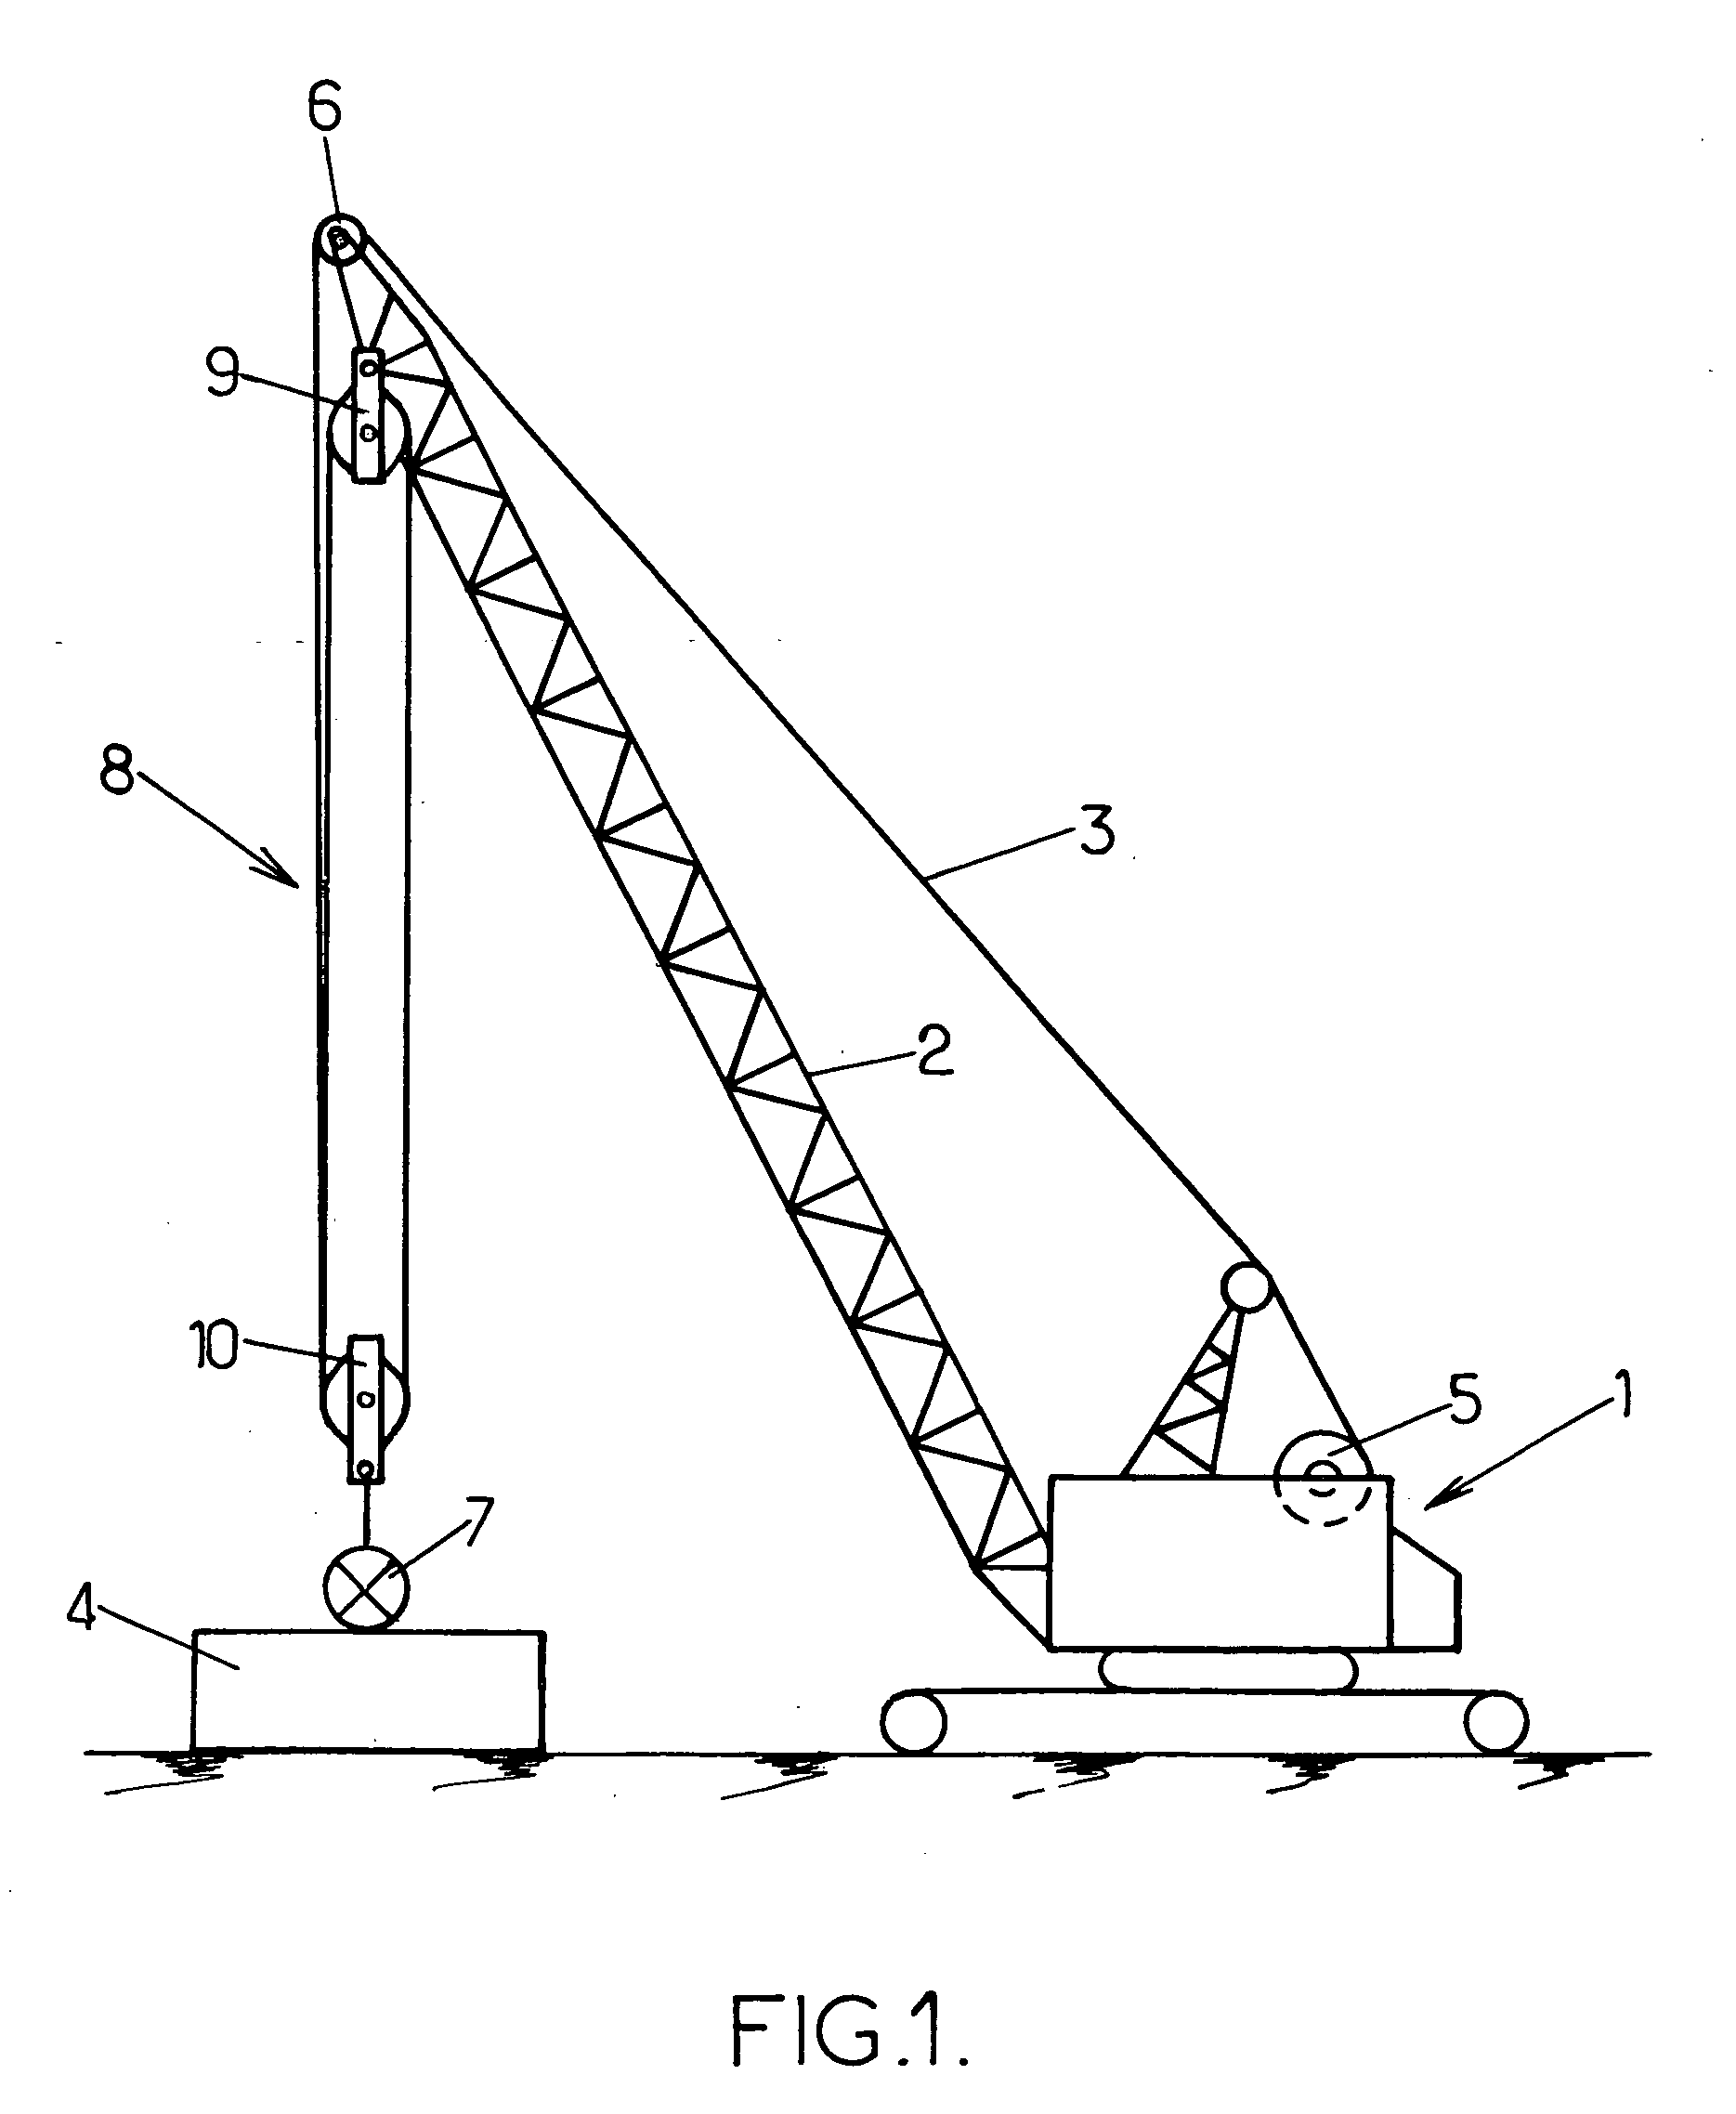 Method and machine for dynamic ground compaction